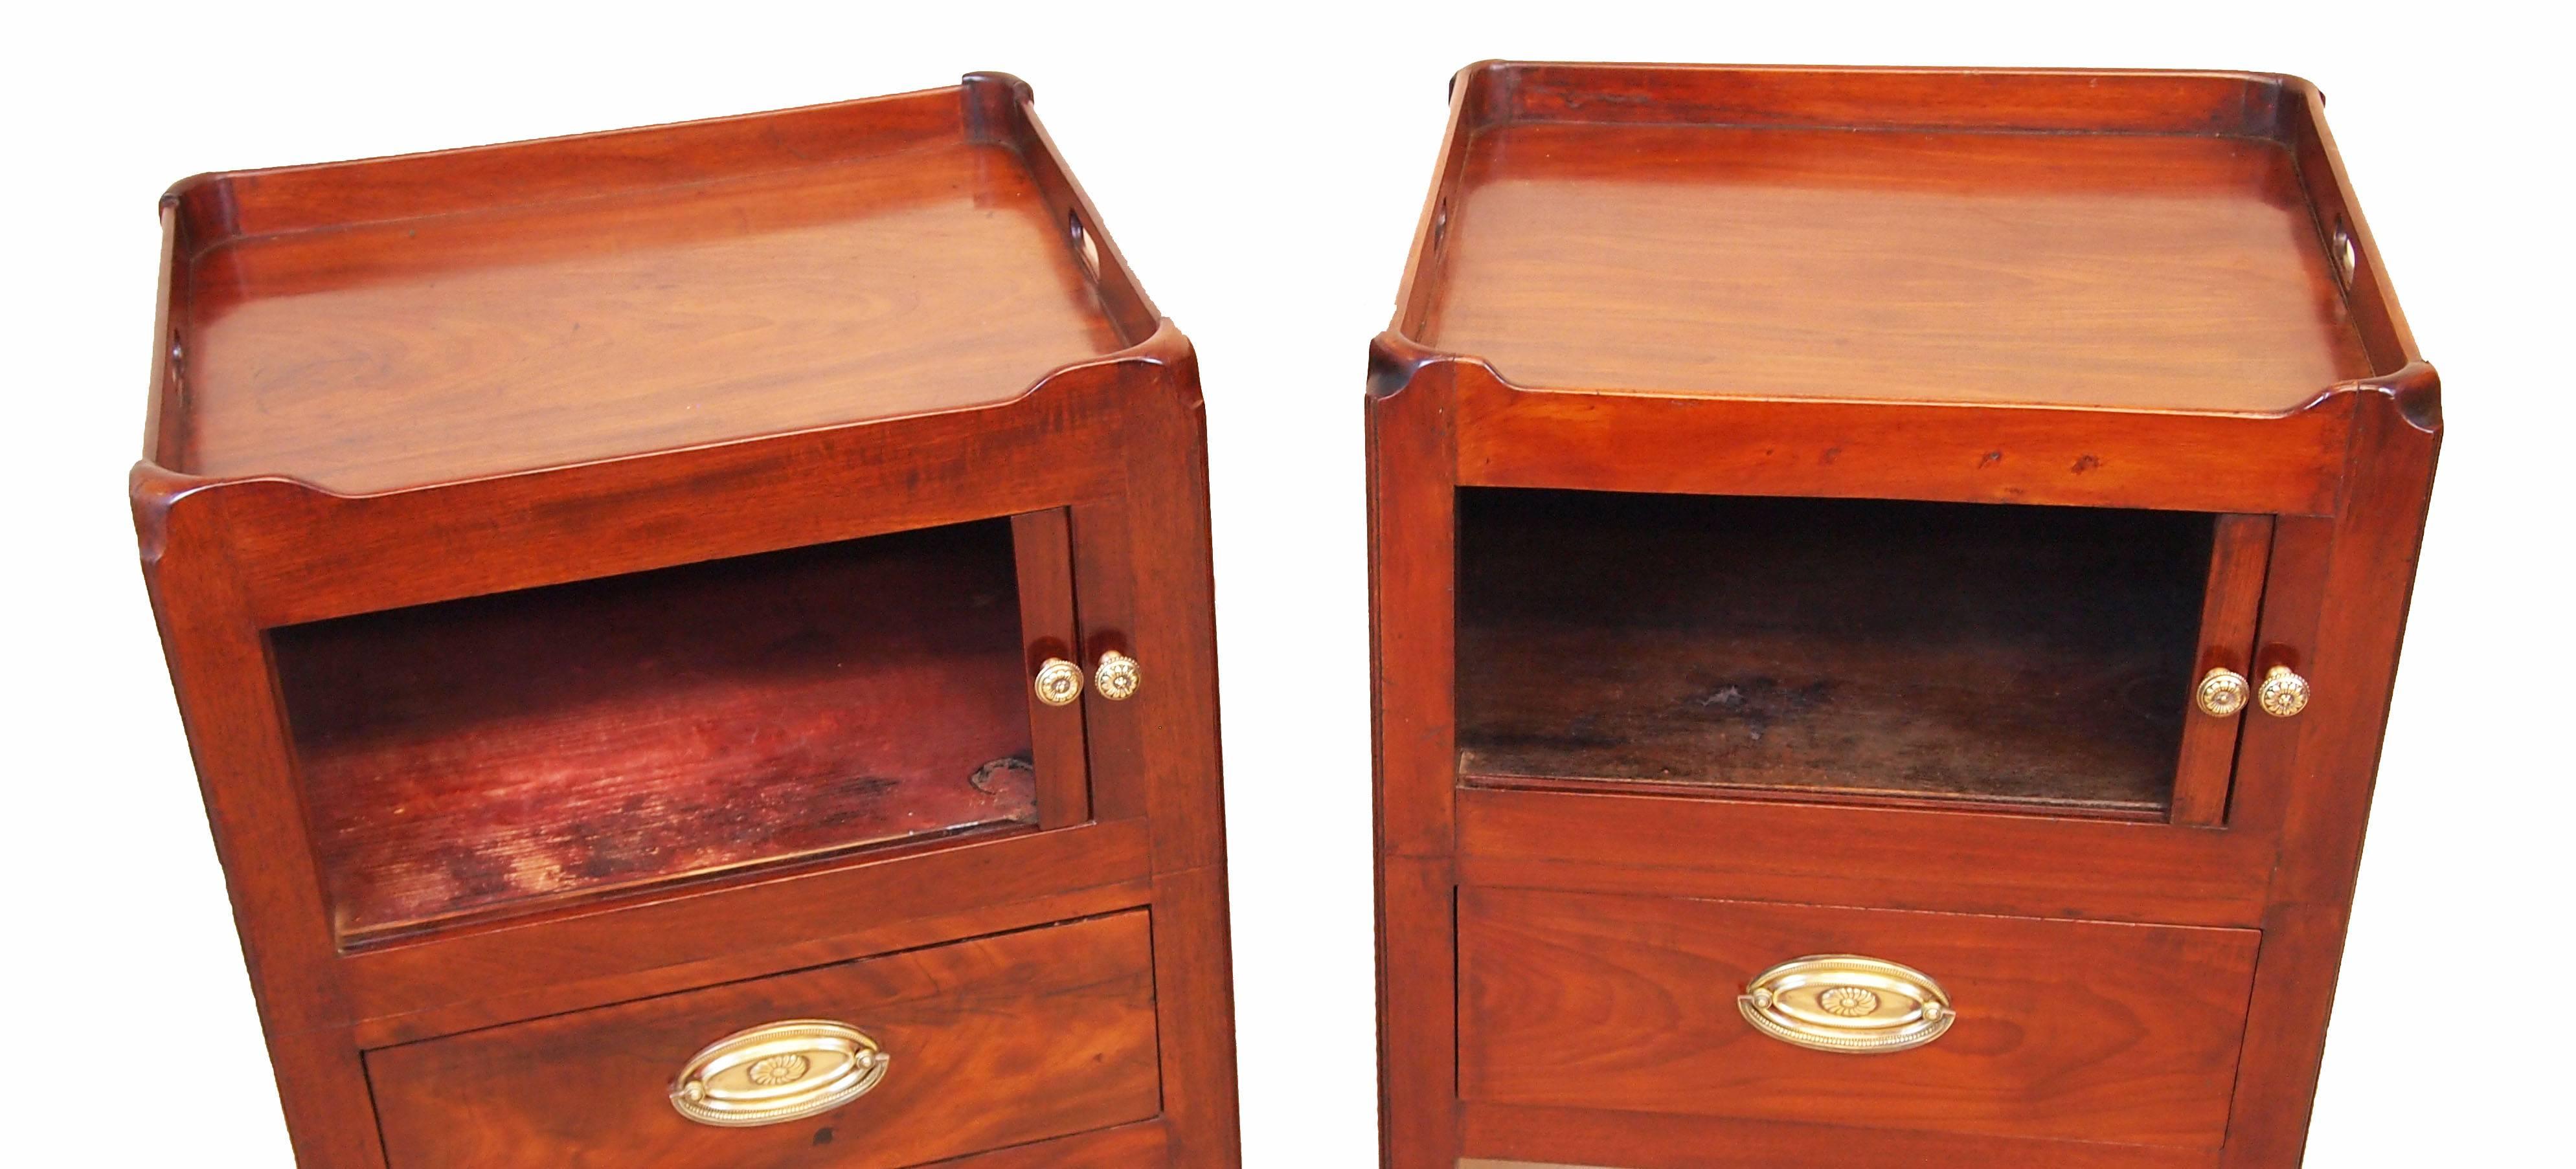 An exceptionally close matching pair of George III period 
Mahogany tray top commodes, or bedside tables, having
Well figured gallery tops above tambour doors and 
Converted drawers raised on square chamfered legs.